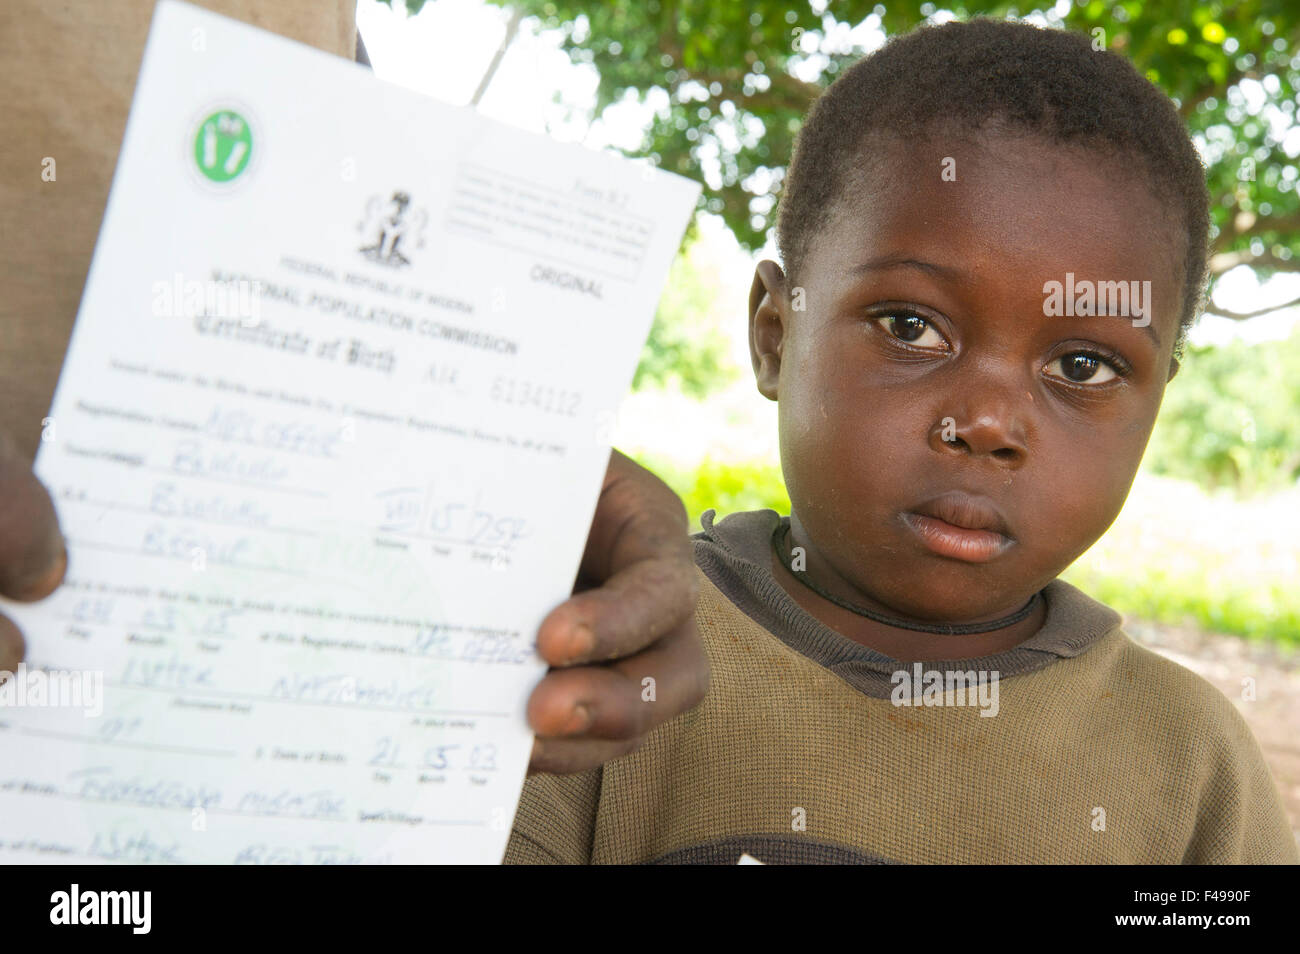 Buruku Local Government Area, Benue, Nigeria. 4th Sep, 2015. September 4, 2015, Buruku, Nigeria - Young brothers display the birth certificates they were issued after being identified as vulnerable through Catholic Relief Services' partner agency Caritas as part of the SMILE program (Sustainable Mechanisms for Improving Livelihoods and Household Empowerment). CRS is training local volunteers to identify and register vulnerable children in this and other nearby communities so they can be issued with legal birth certificates. © David Snyder/ZUMA Wire/Alamy Live News Stock Photo